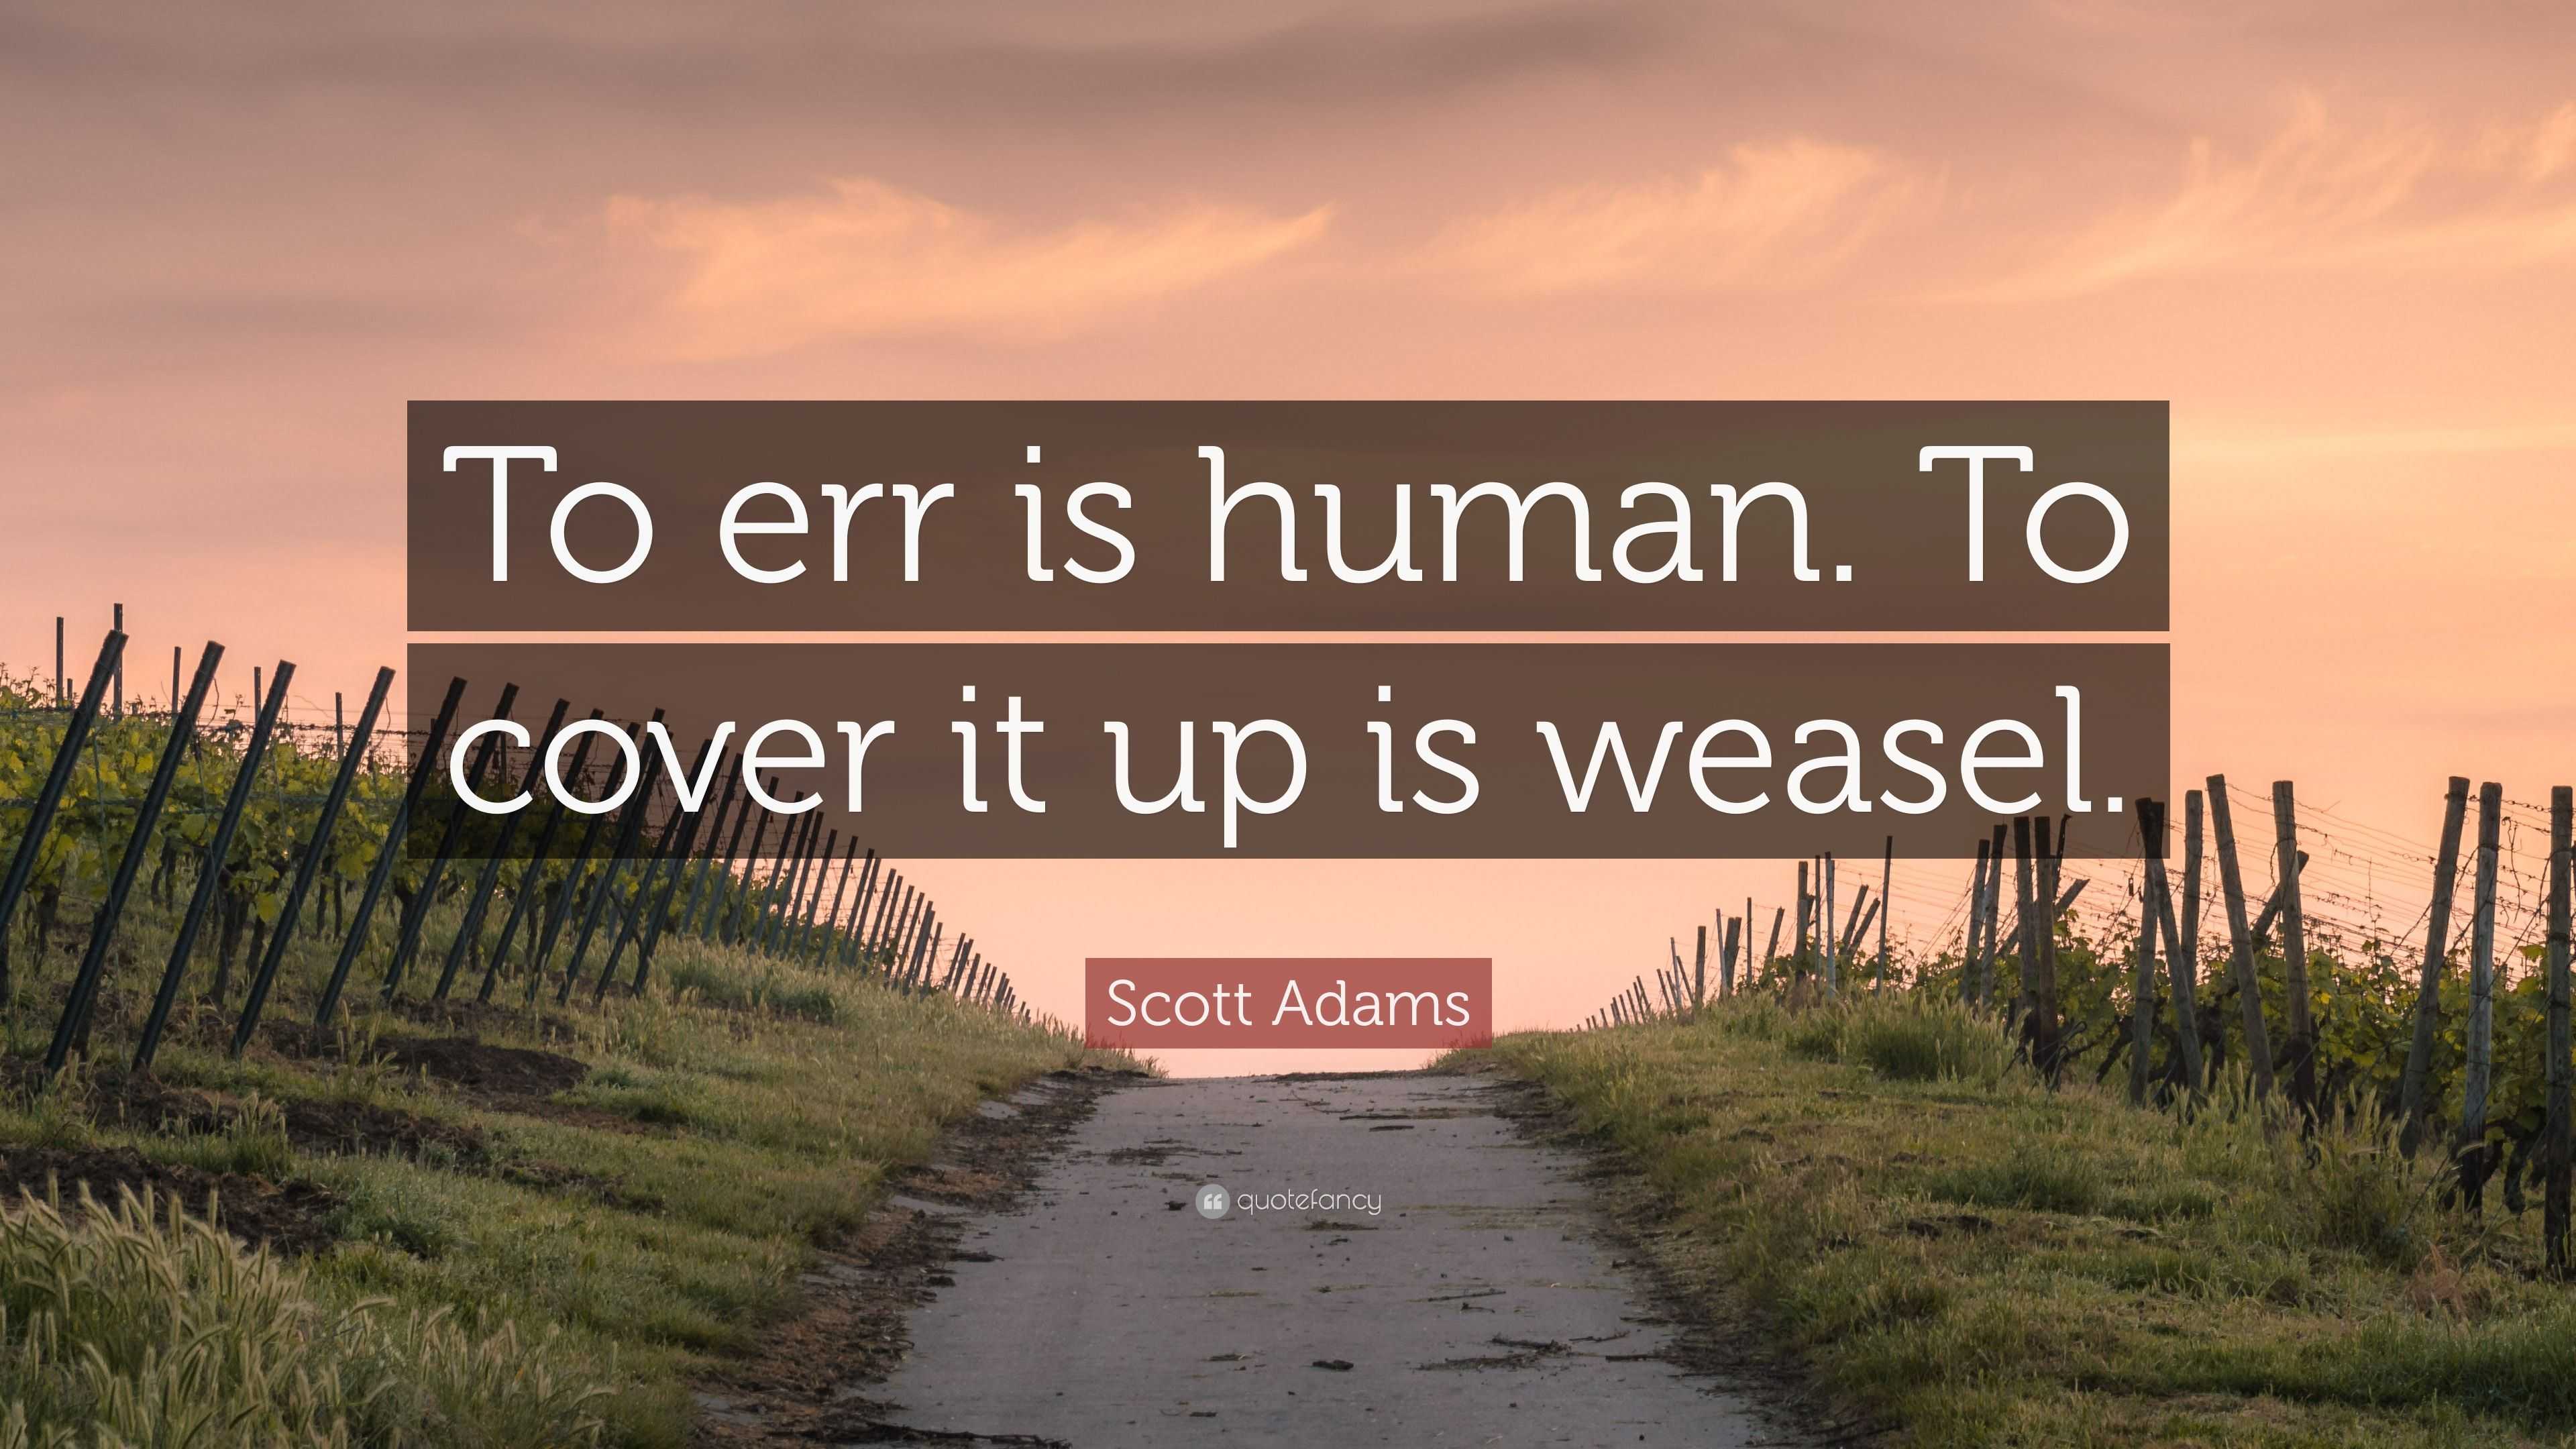 Scott Adams Quote “To err is human. To cover it up is weasel.”